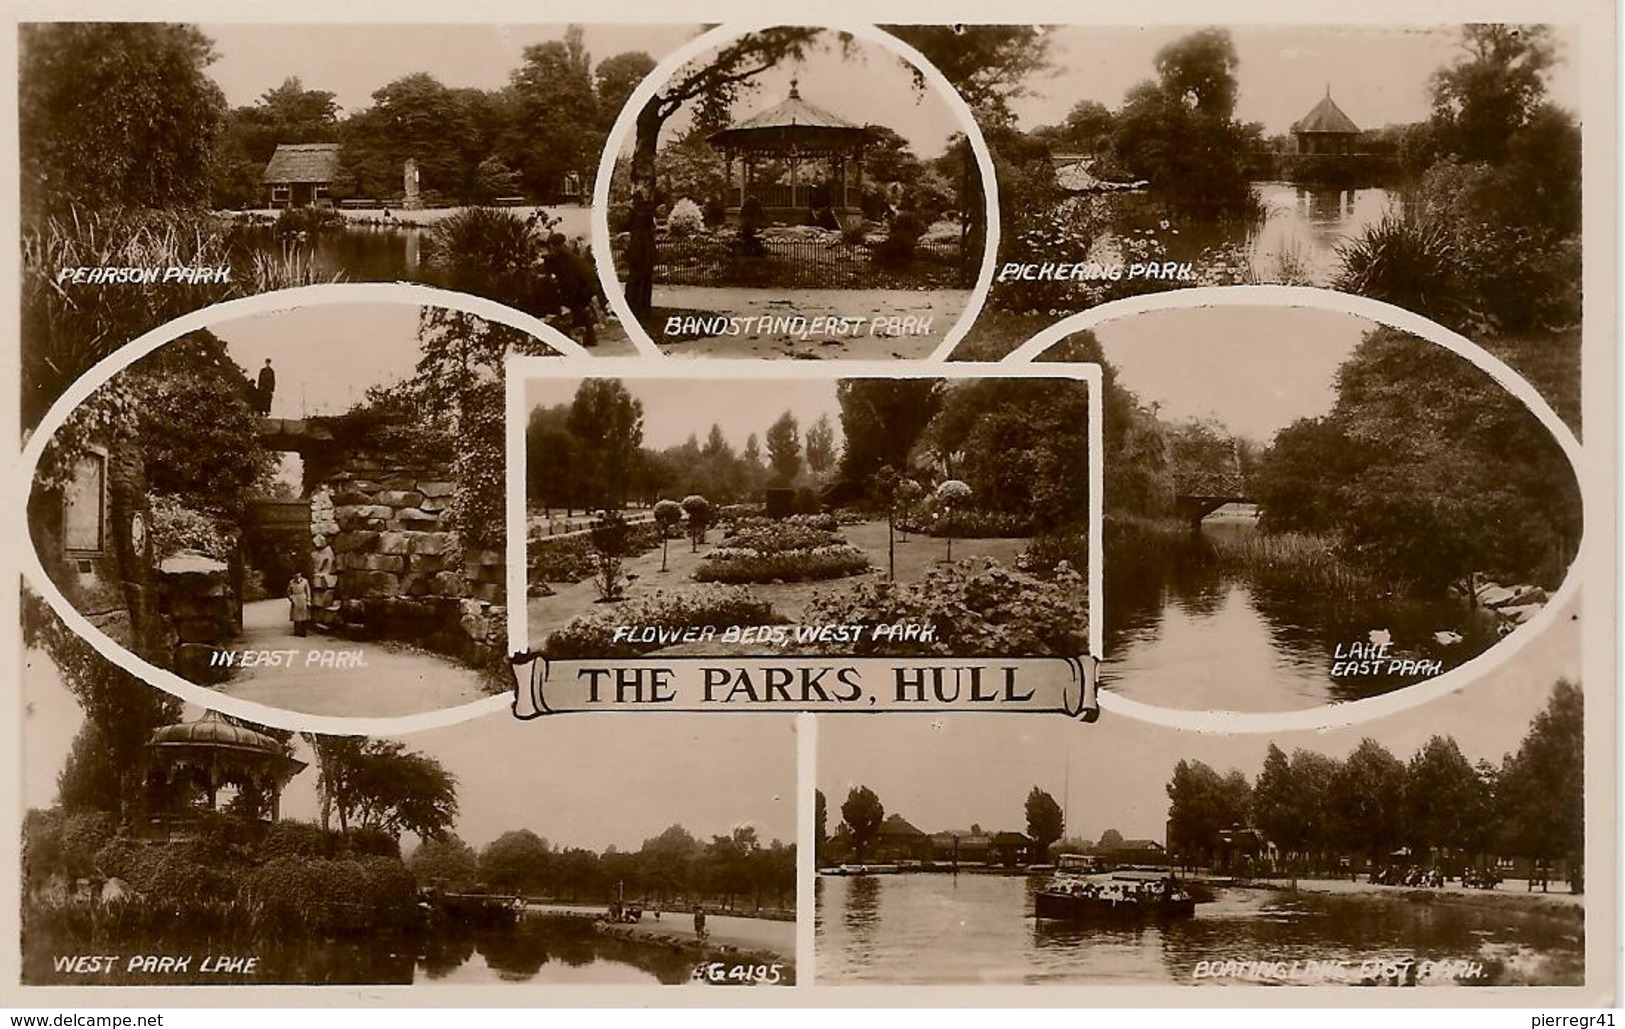 CPA-1950-ANGLETERRE-YORSHIRE-HULL-PARKS-MULTIVUES- TBE - Hull